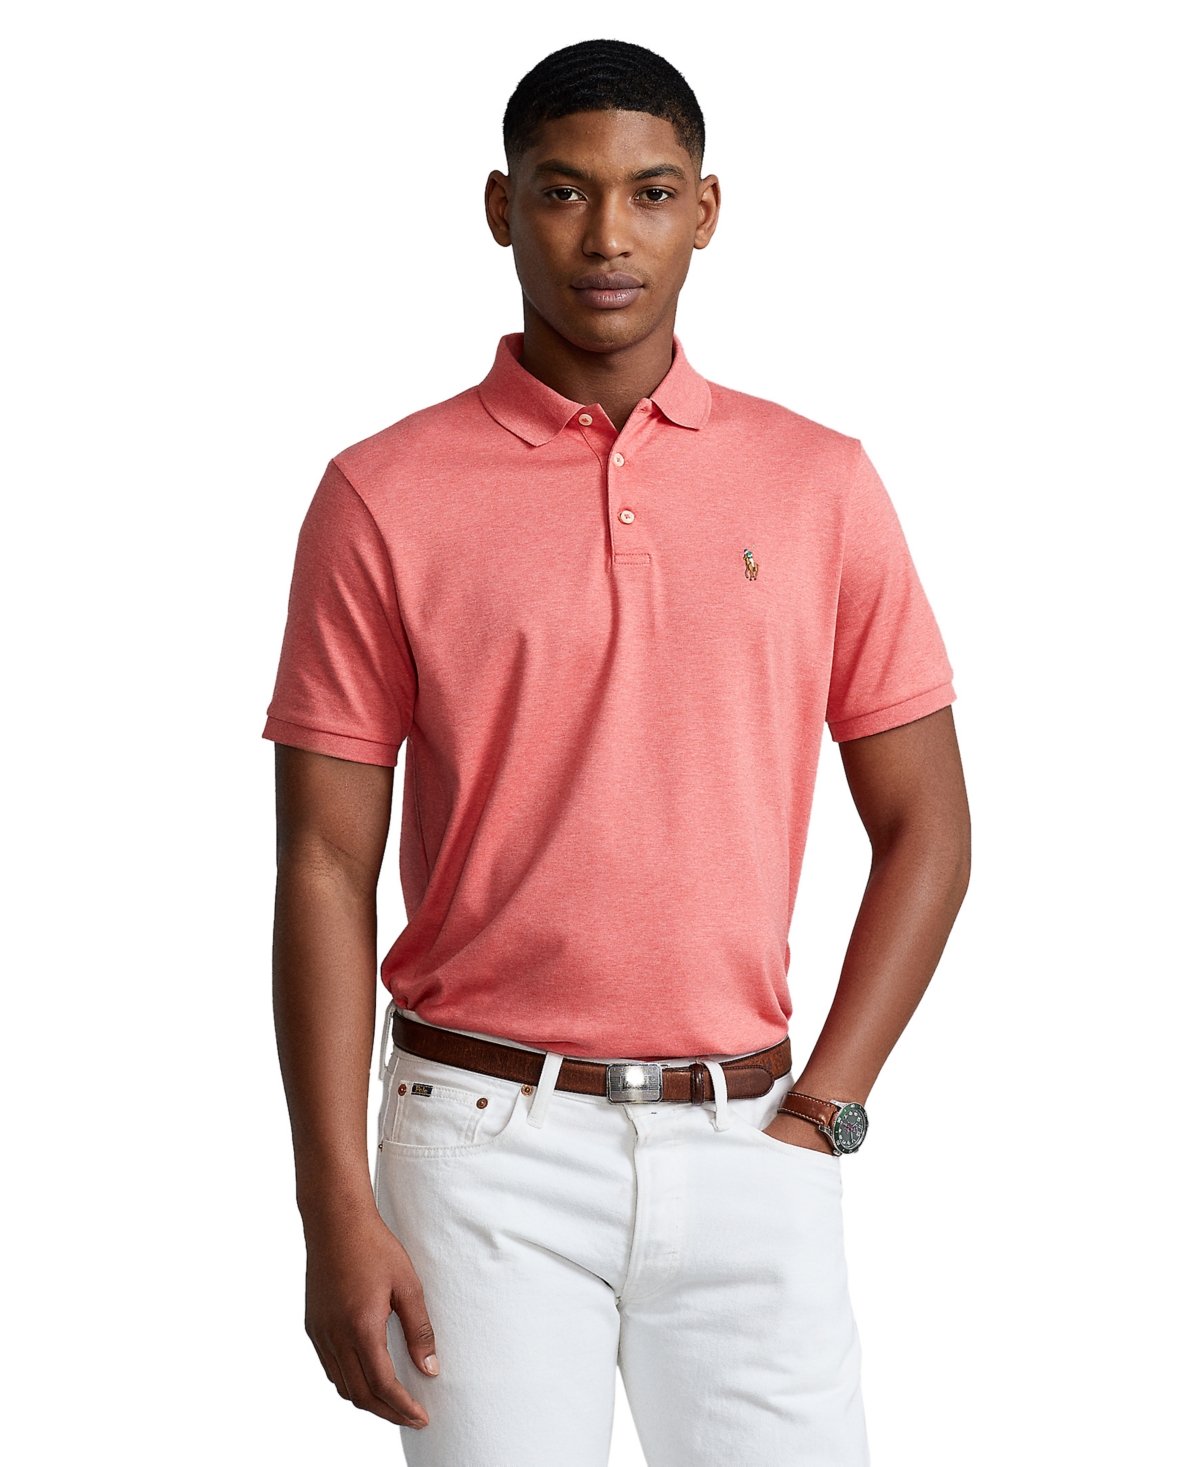 Polo Ralph Lauren Men's Classic Fit Soft Cotton Polo In Highland Rose Heather